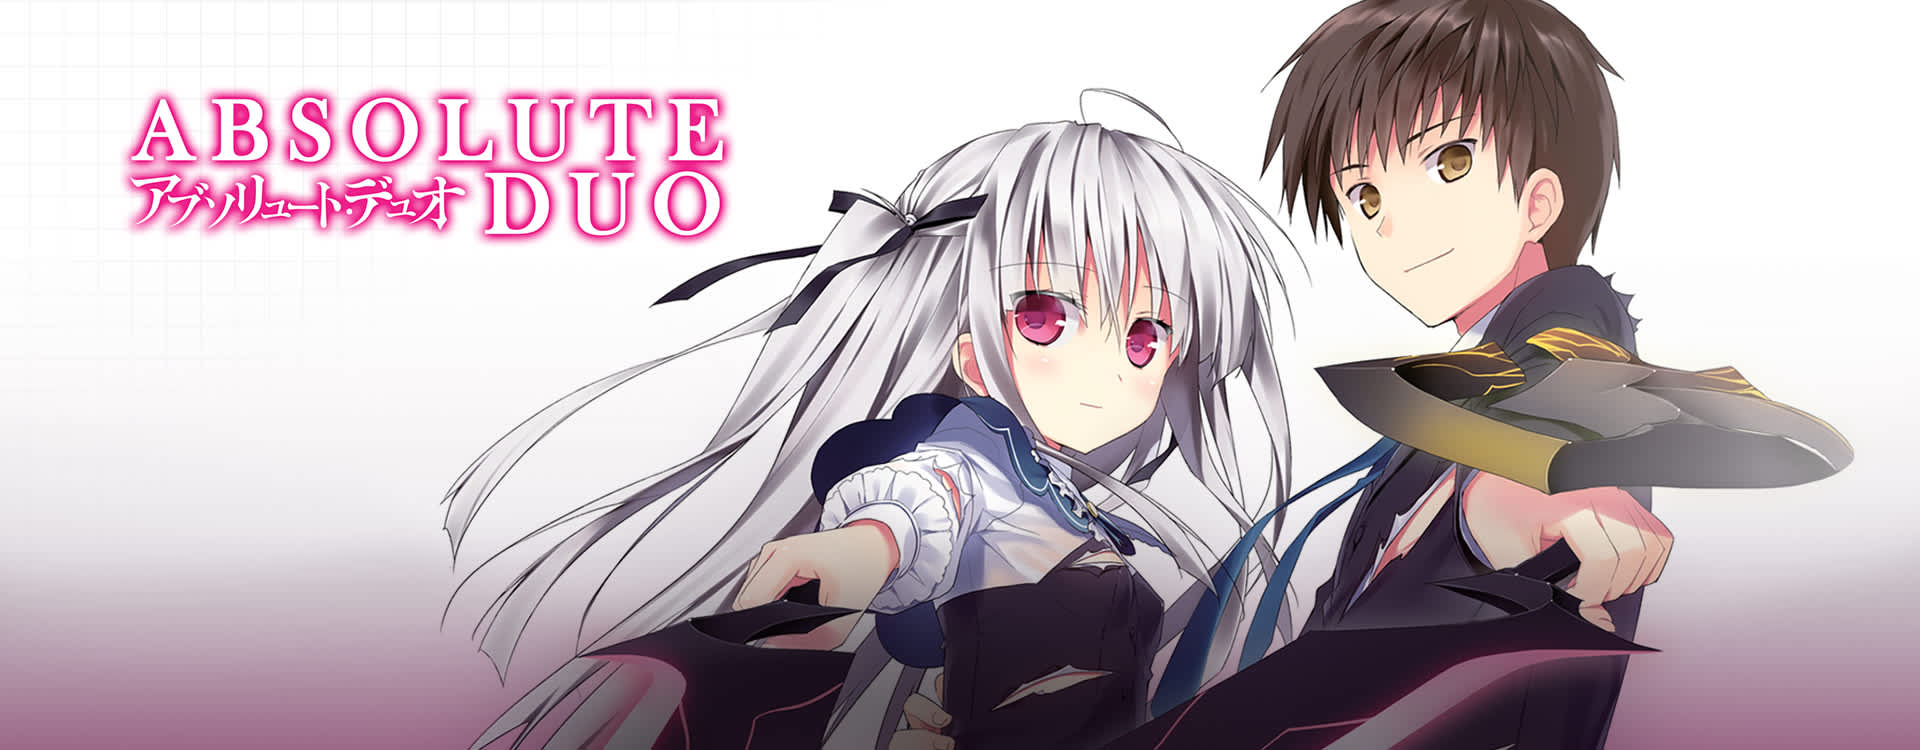 The Random Review: Absolute Duo - Anime